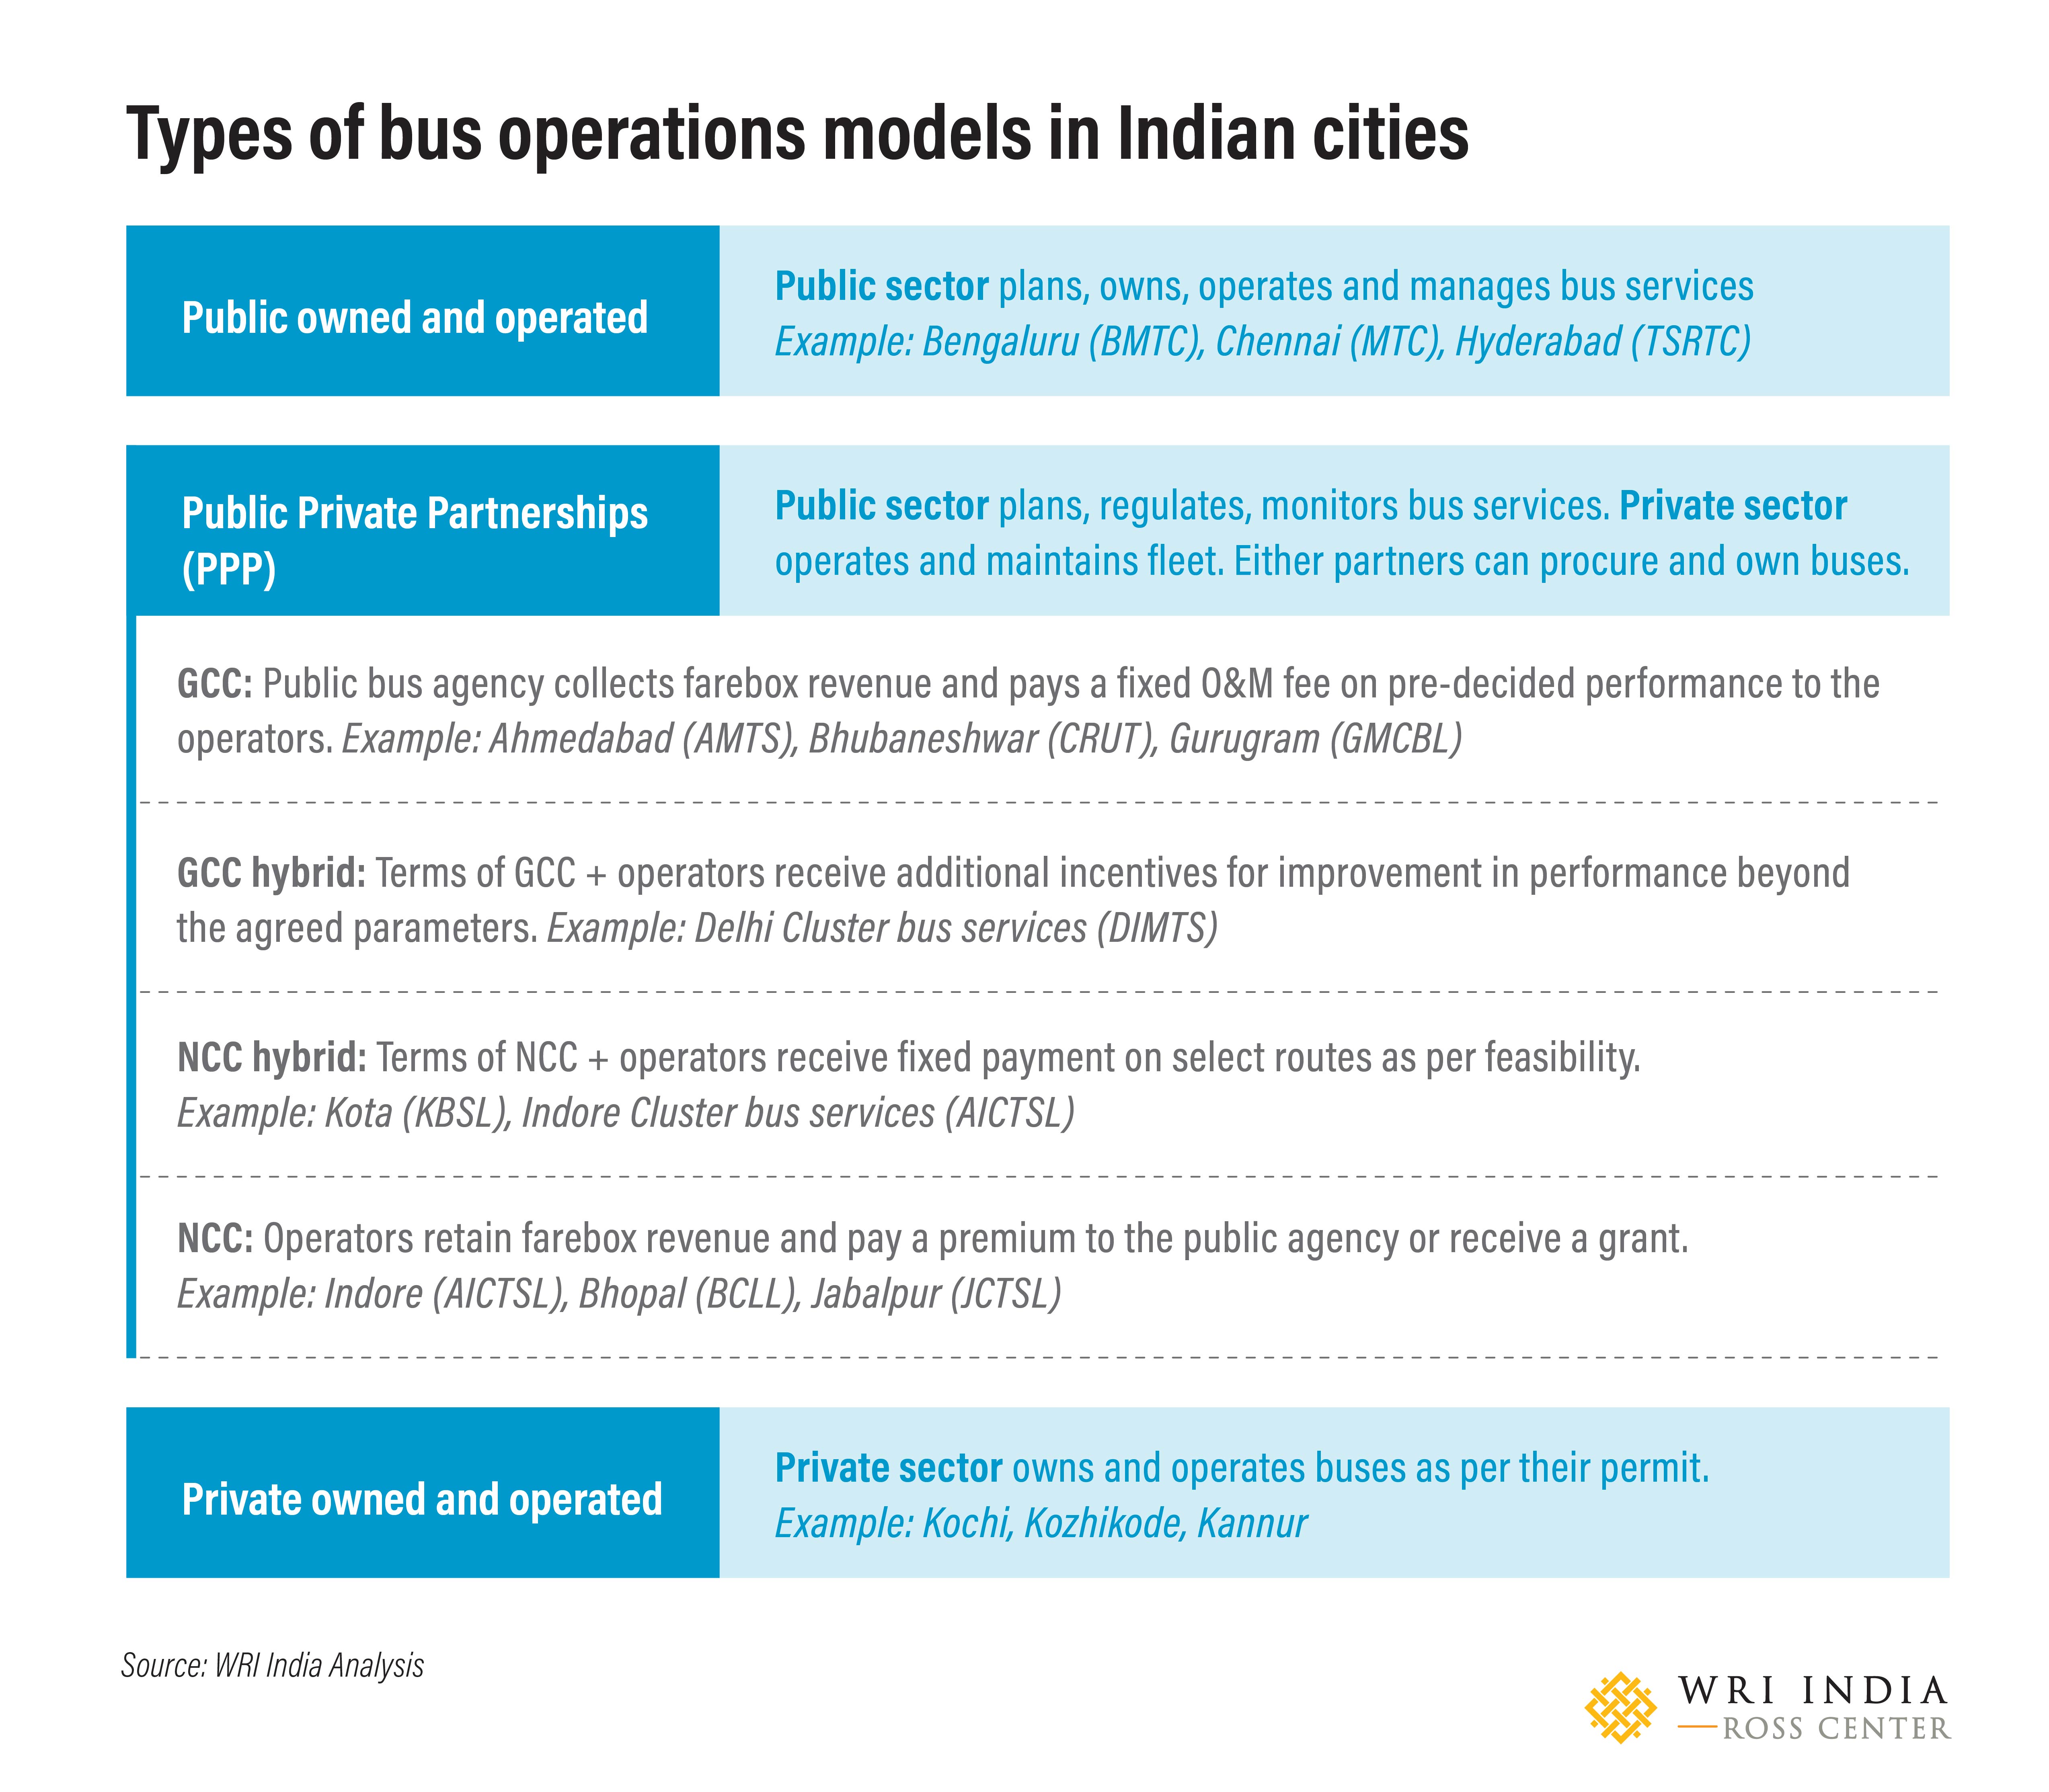 Types of bus operations models in Indian cities